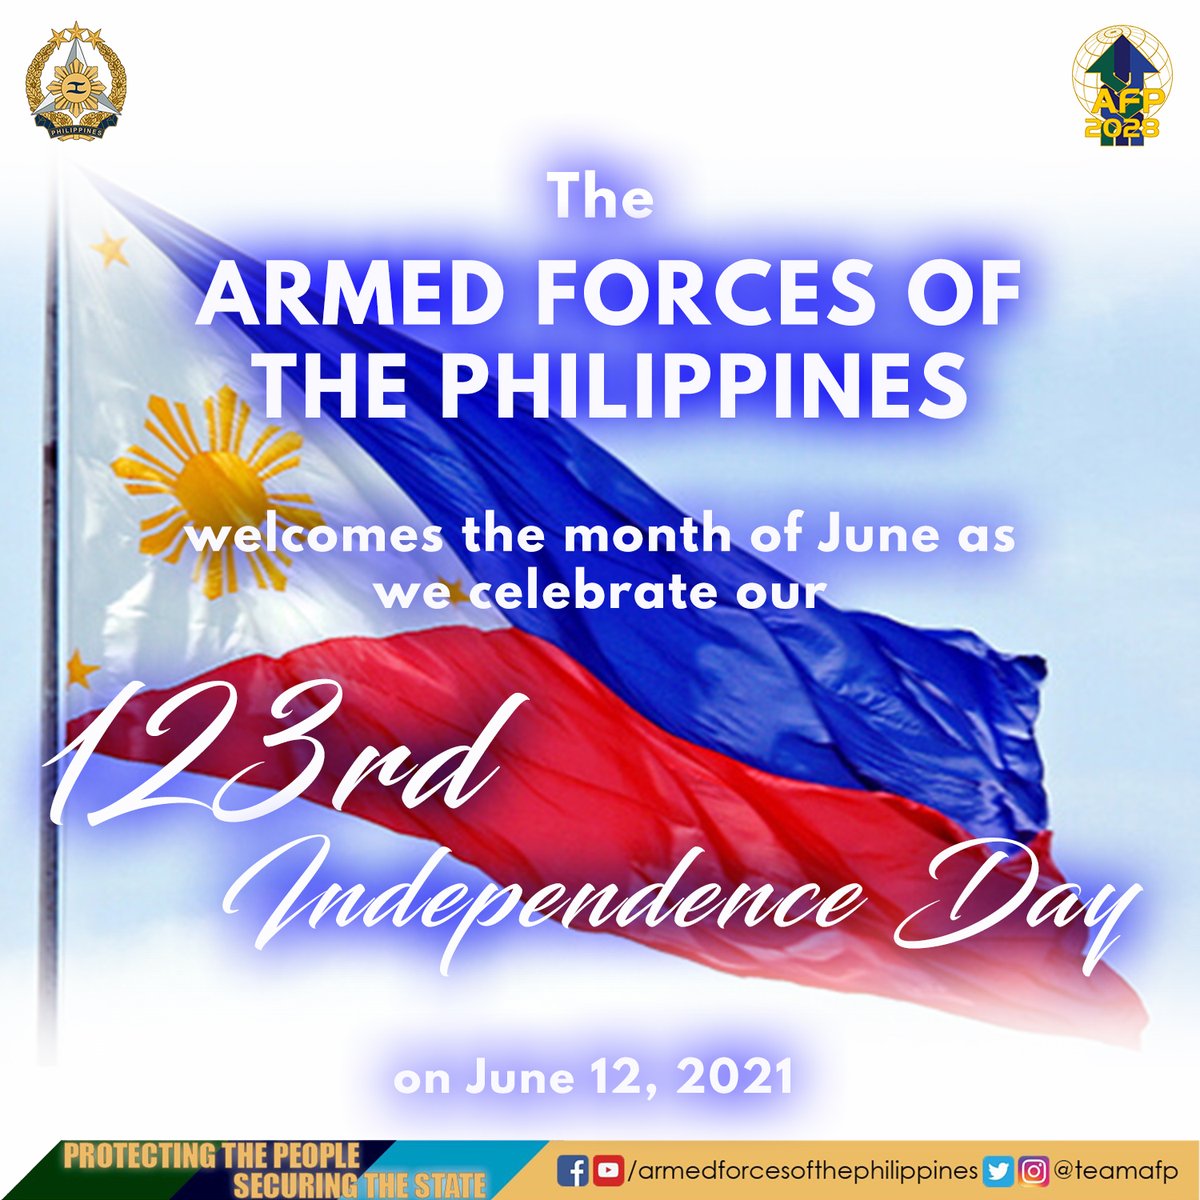 Armed Forces Of The Philippines The Armed Forces Of The Philippines Welcomes The Month Of June As We Celebrate Our 123rd Independence Day On June 12 21 Afpyoucantrust T Co 9k604ywls9